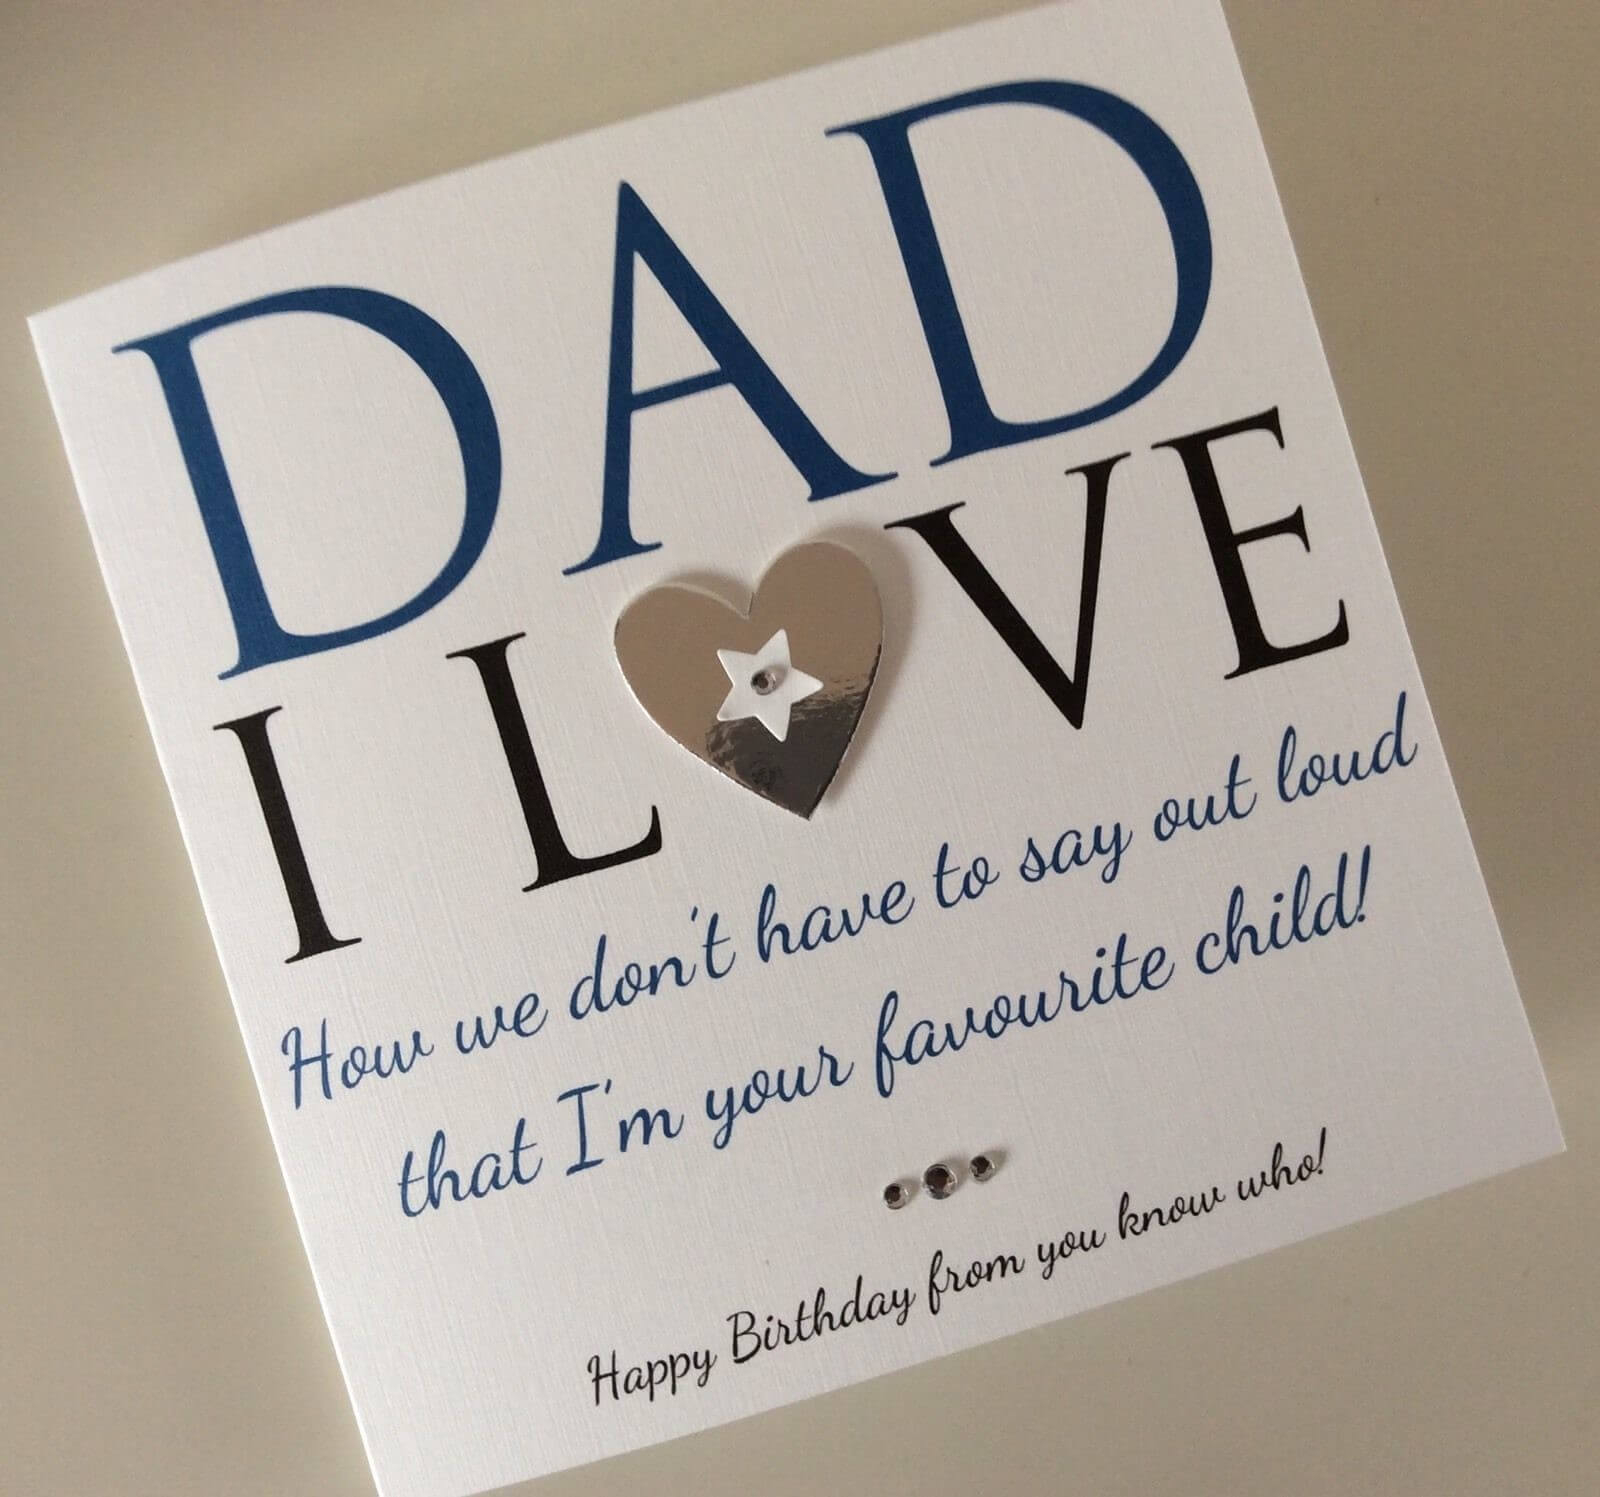 Birthday Cards Ideas For Dad Birthday Card Ideas For Dad Examples And Forms